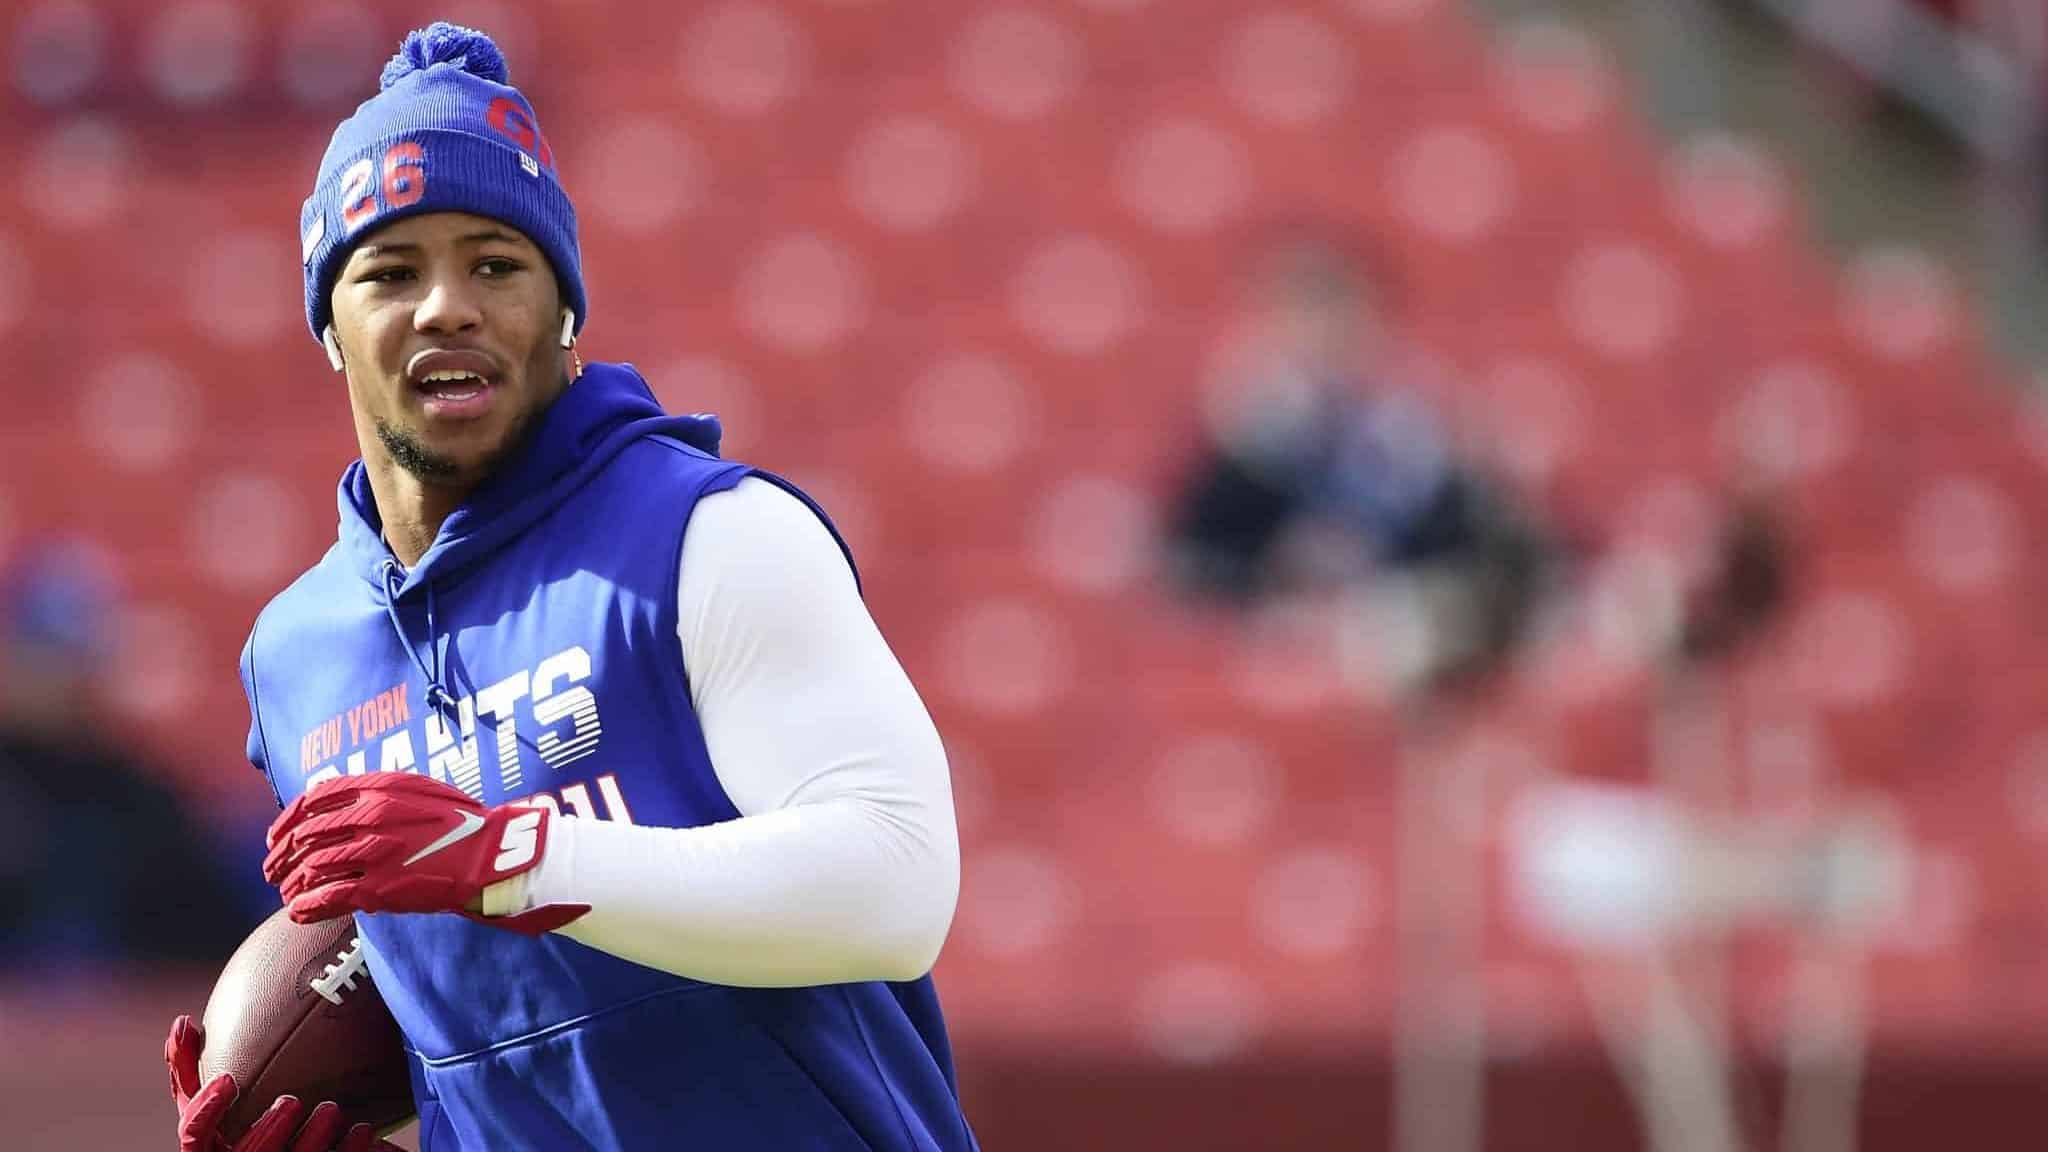 LANDOVER, MD - DECEMBER 22: Saquon Barkley #26 of the New York Giants warms up before a game against the Washington Redskins at FedExField on December 22, 2019 in Landover, Maryland.